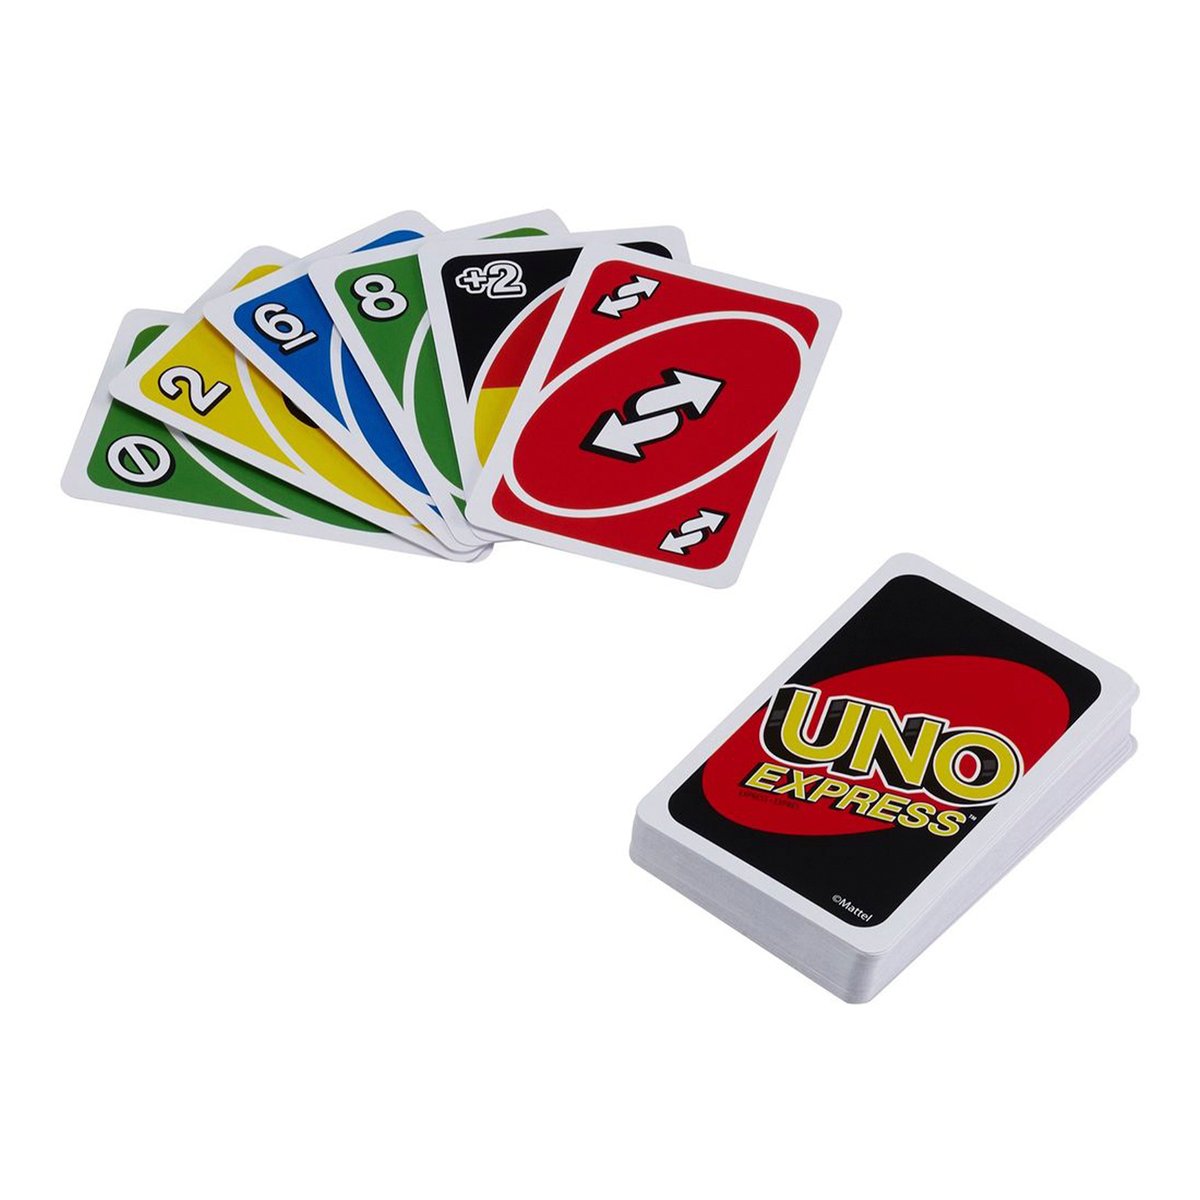 Uno Express Cards GDR45